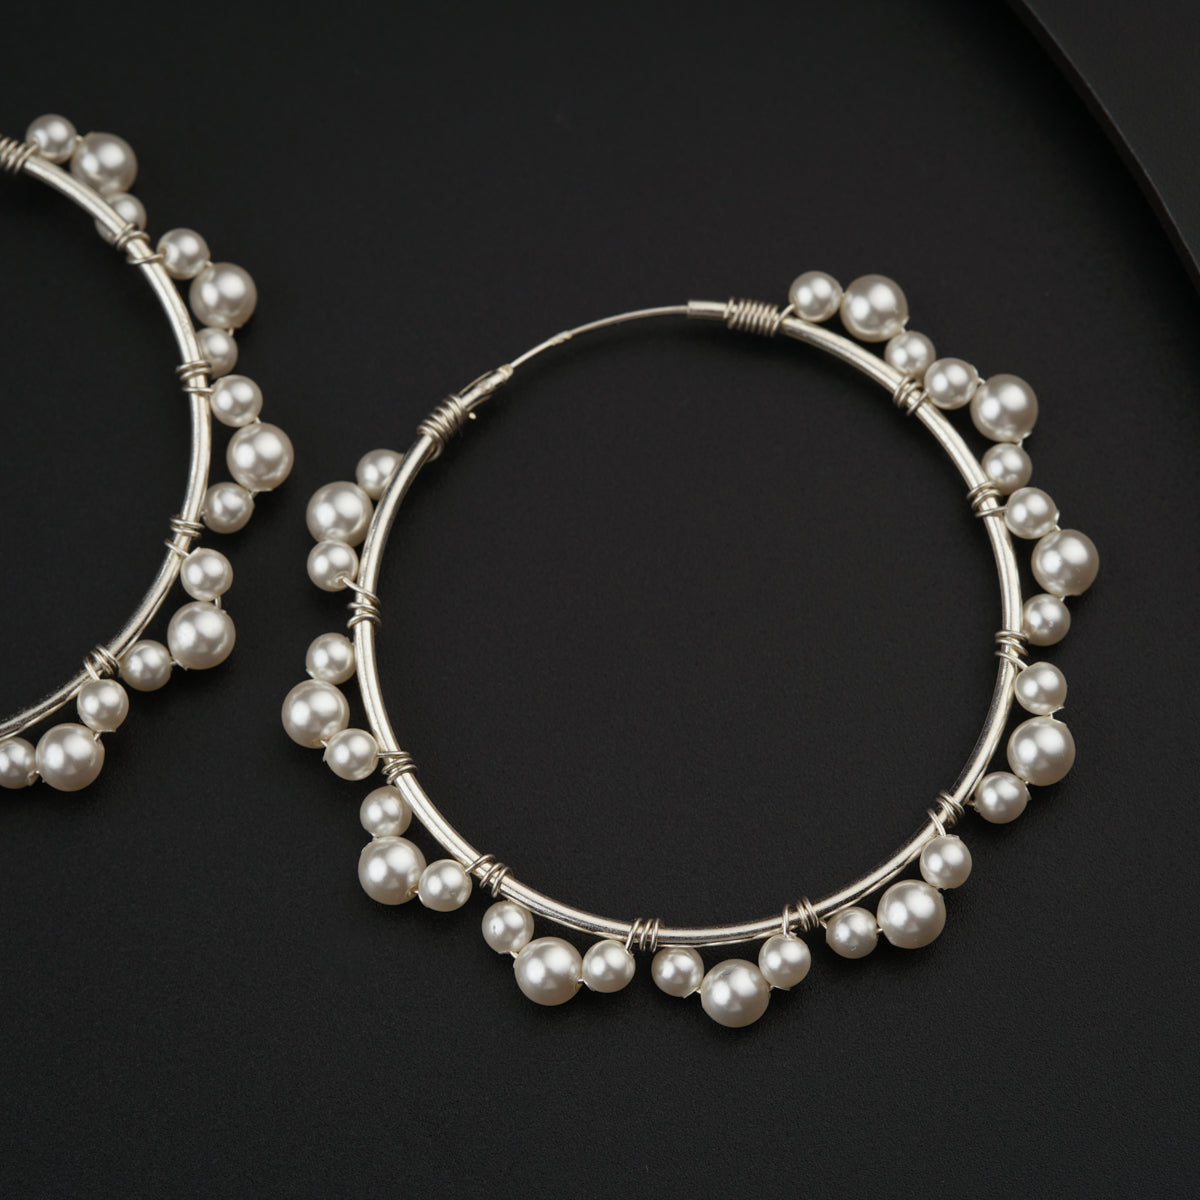 a pair of hoop earrings with pearls on a black surface